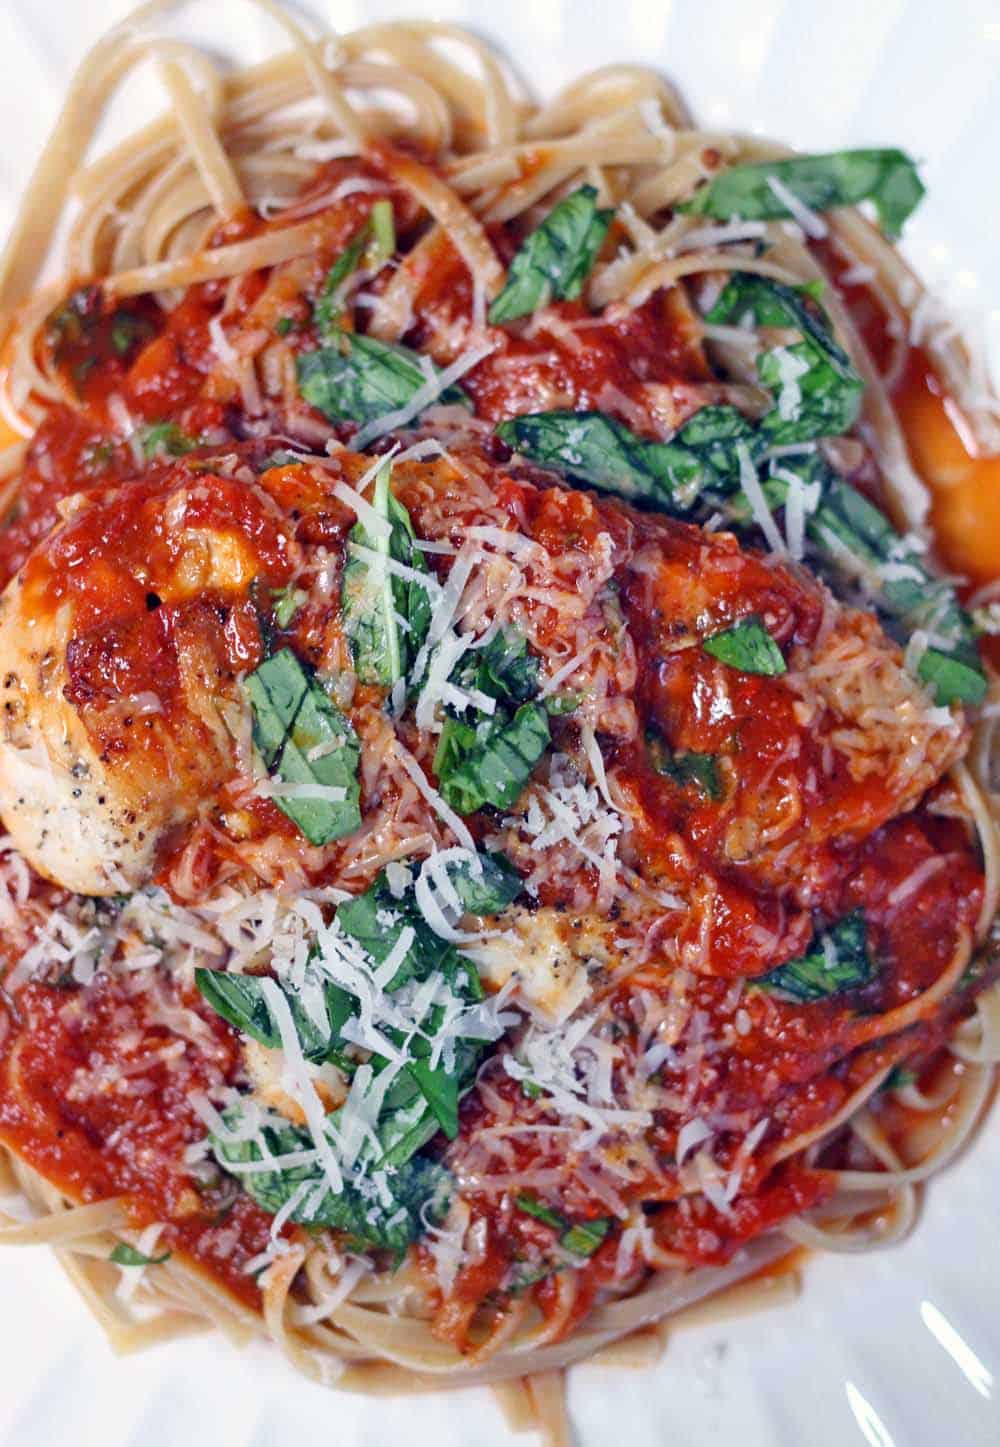 Chicken and Linguine with Tomato Basil Butter Sauce | Perfectly seared chicken with easy, buttery marinara sauce served atop a bed of whole wheat linguine- tastes like Italy, but is so quick and easy to make on a weeknight!